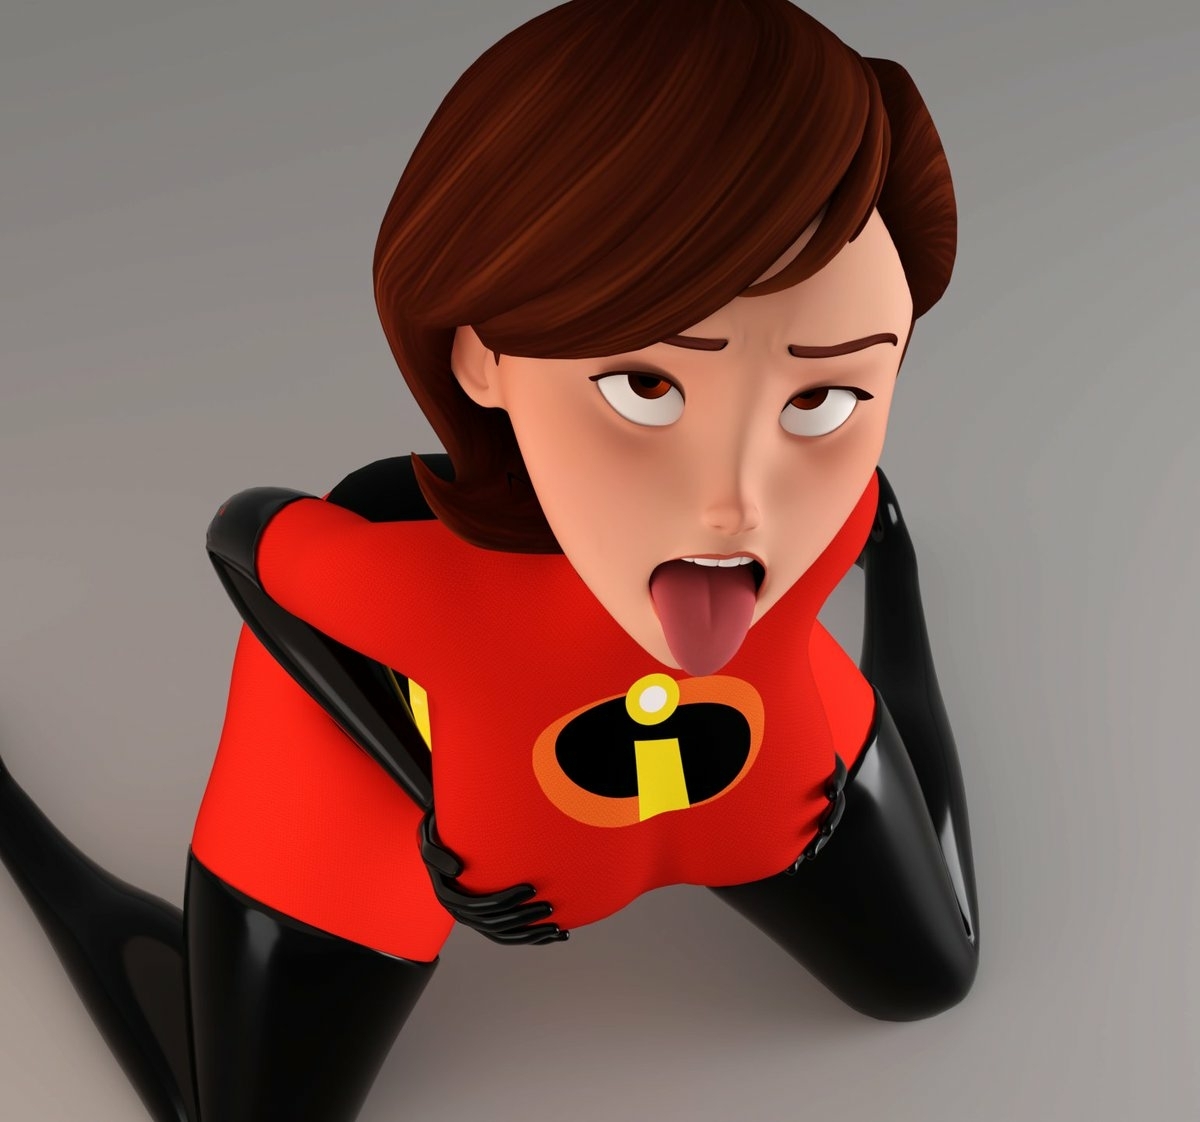 You see this at your front door  what do? Elastigirl The Incredibles Nipples Cake Boobs Big boobs Ass Big Ass Big Tits Horny Face Horny Sexy 3d Porn